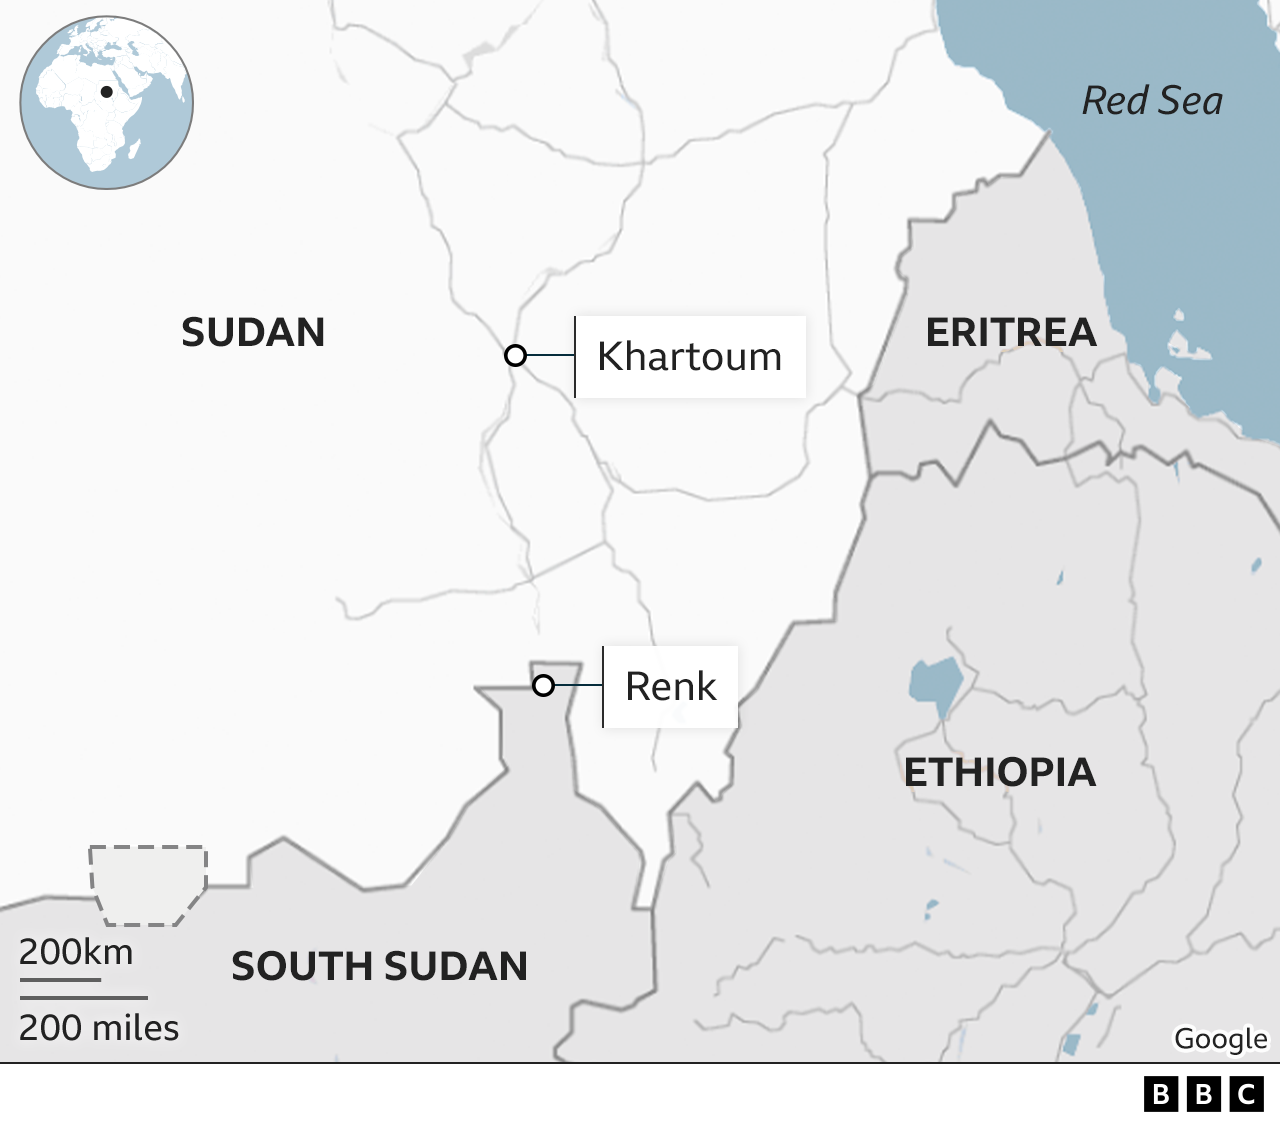 A map showing South Sudan and Sudan